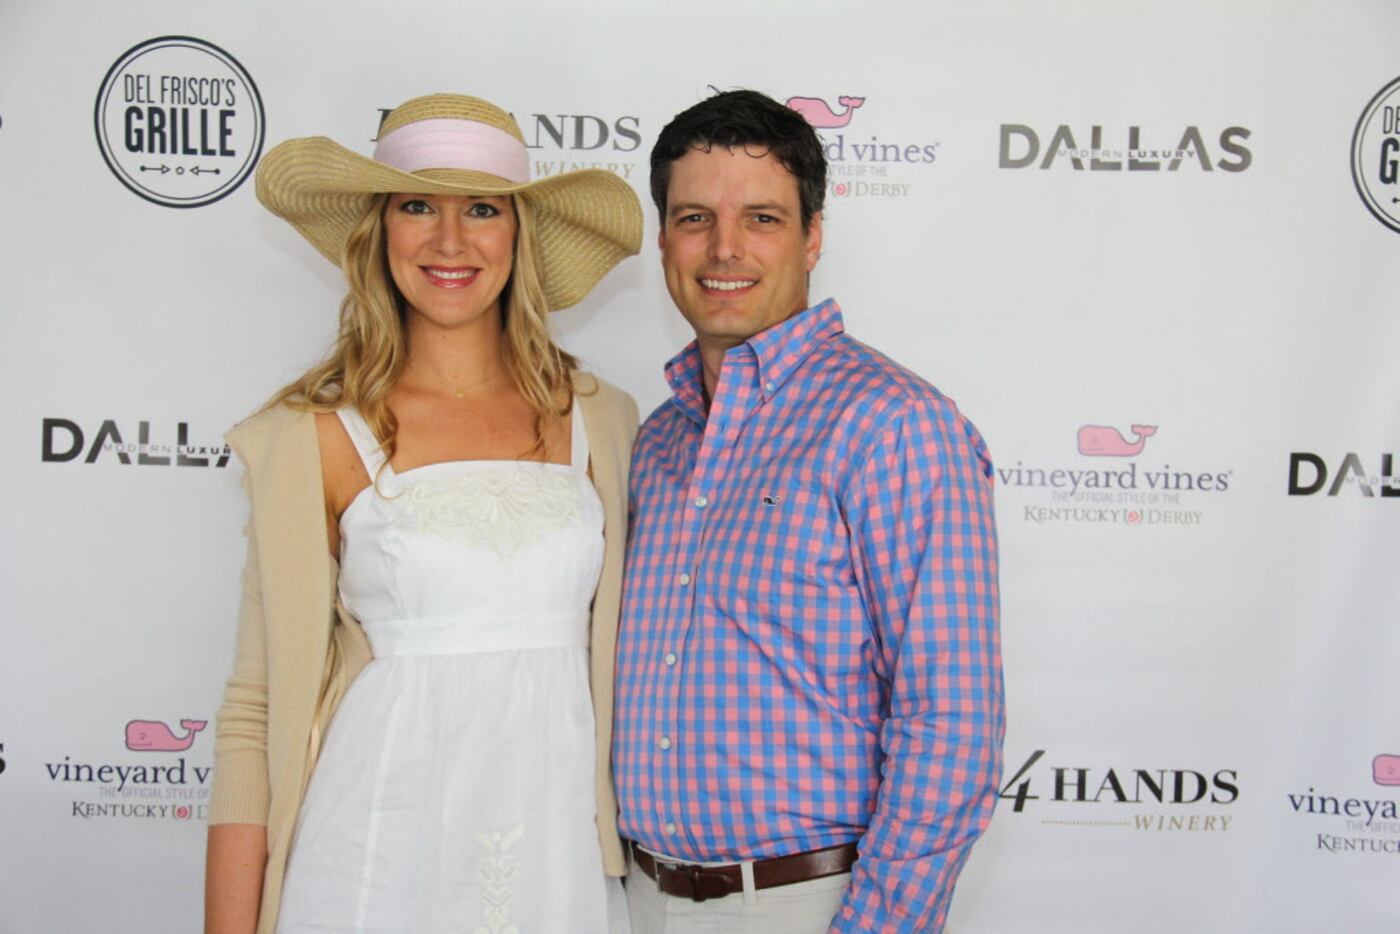 Heather and Scott Alexander at Kentucky Derby Day, which was held at Del Frisco's Grille in...